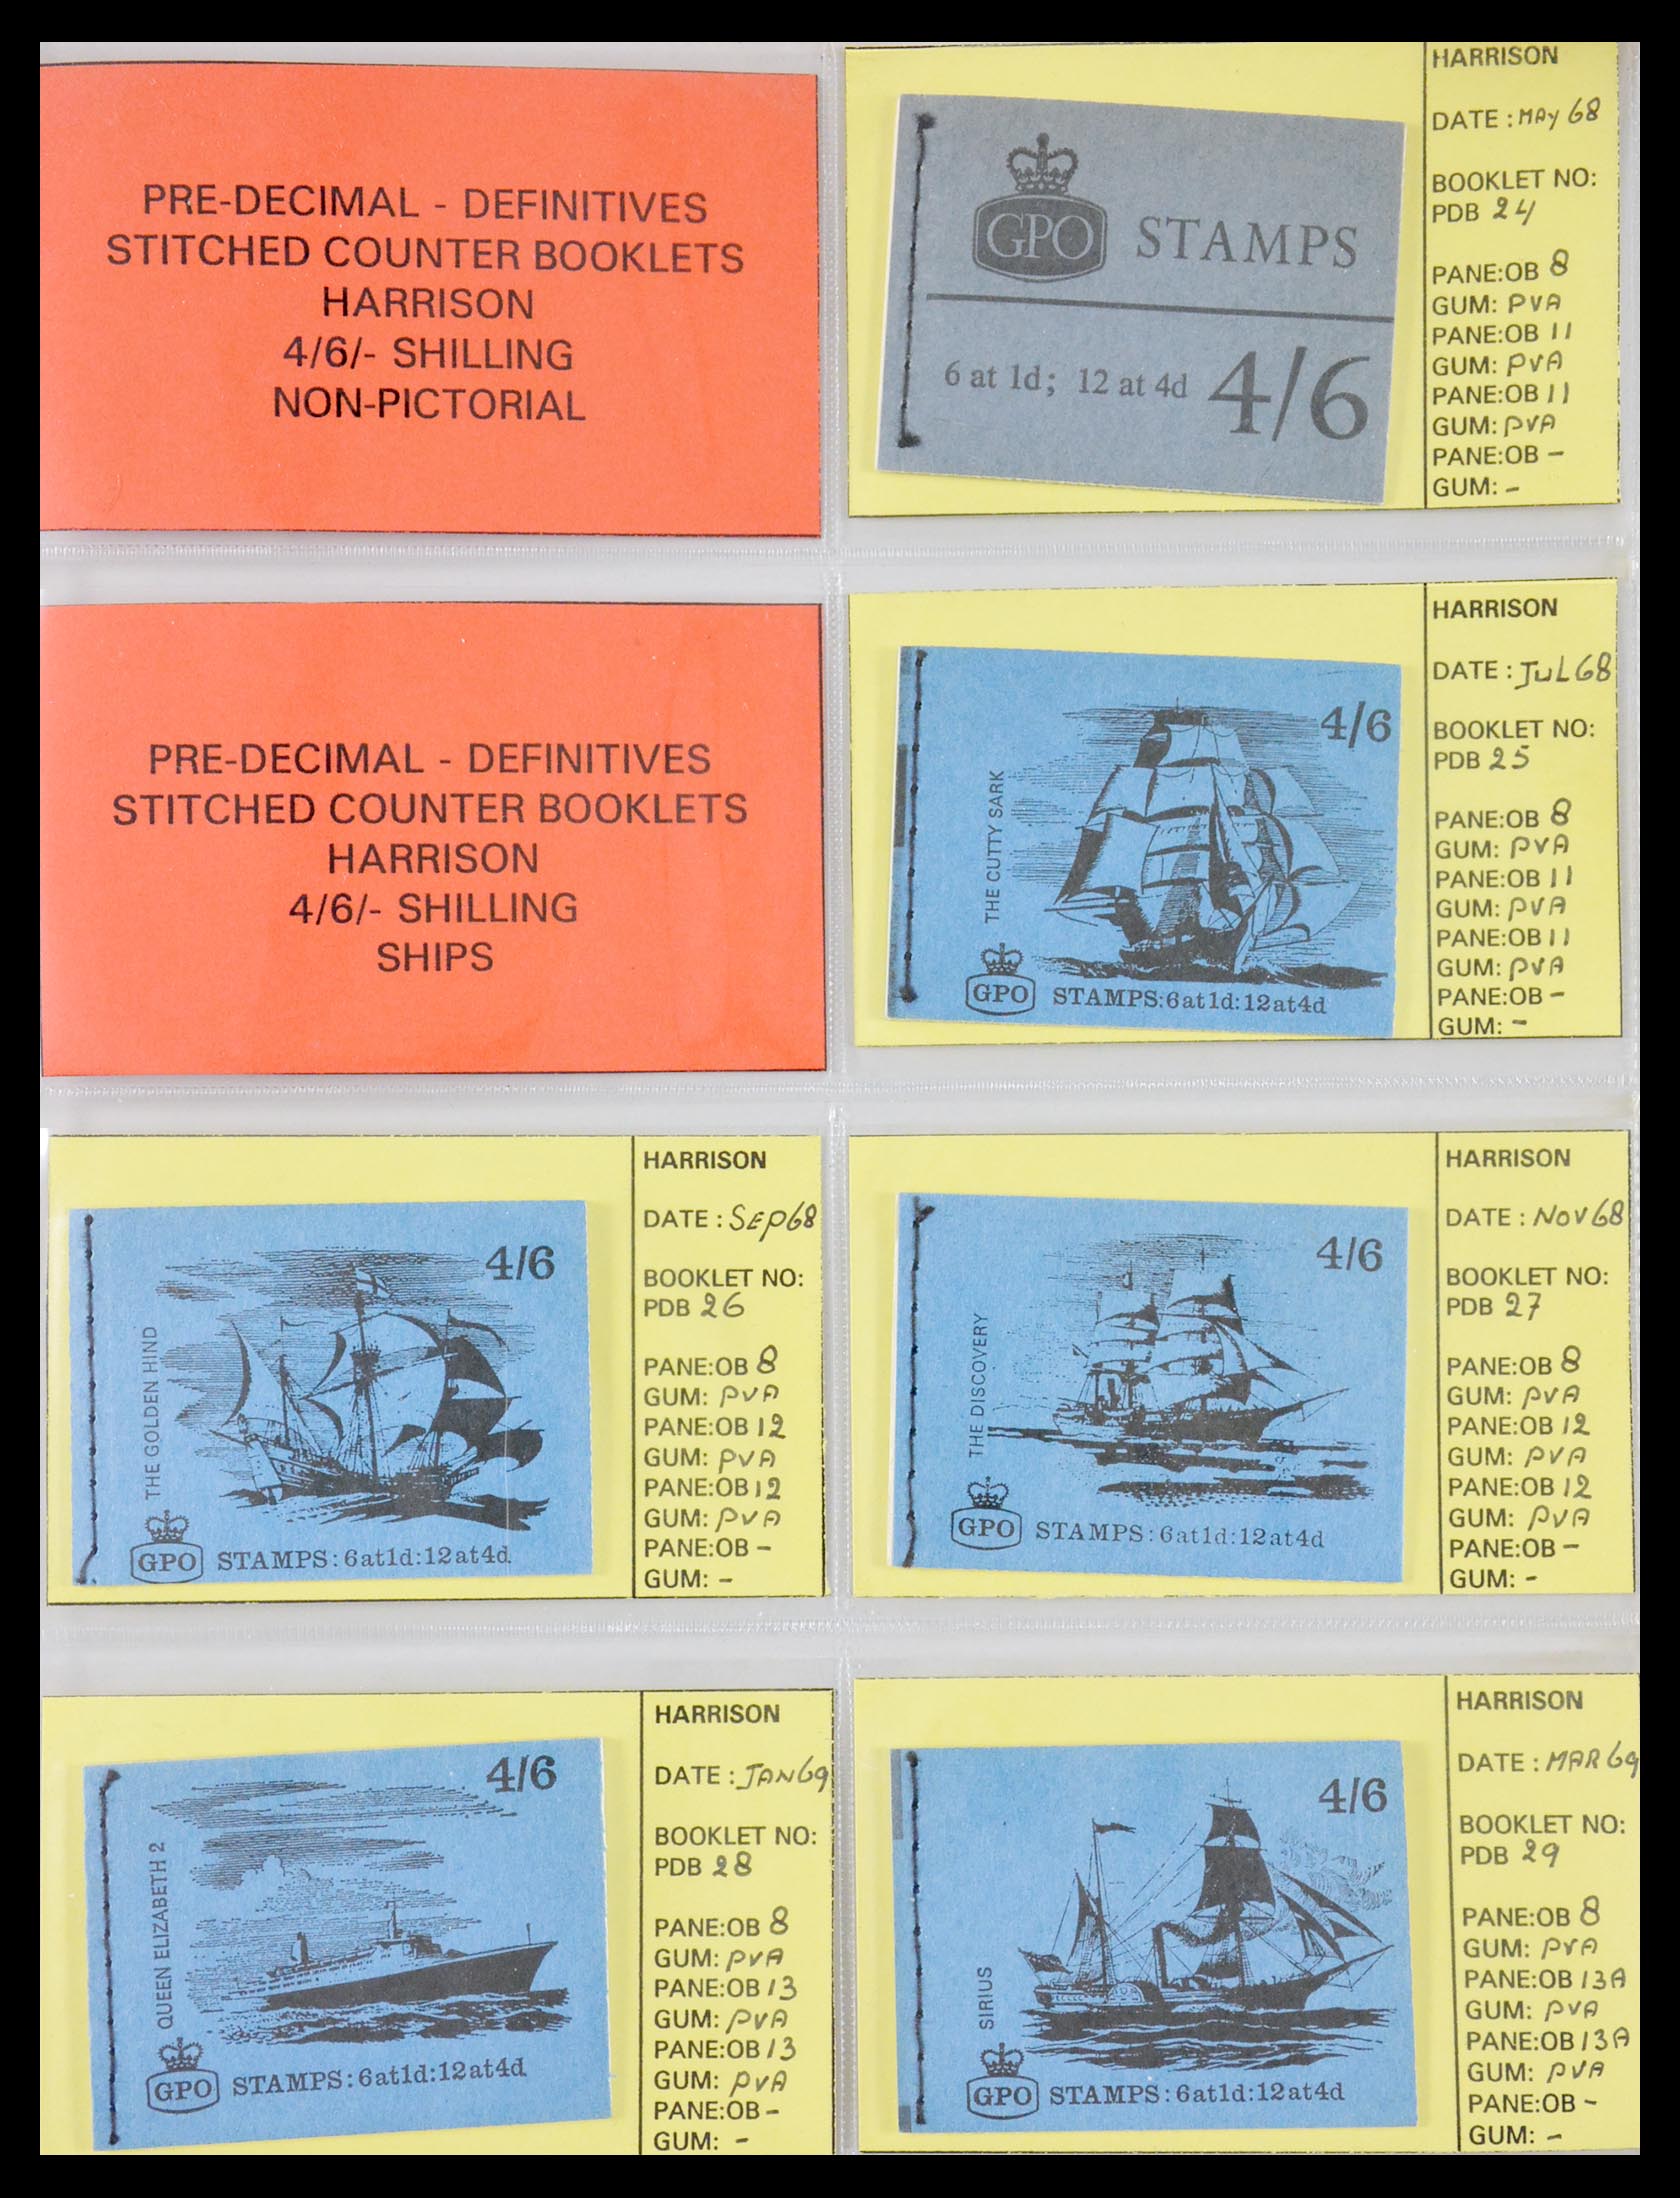 29755 001 - 29755 Great Britain stamp booklets 1968-1977.